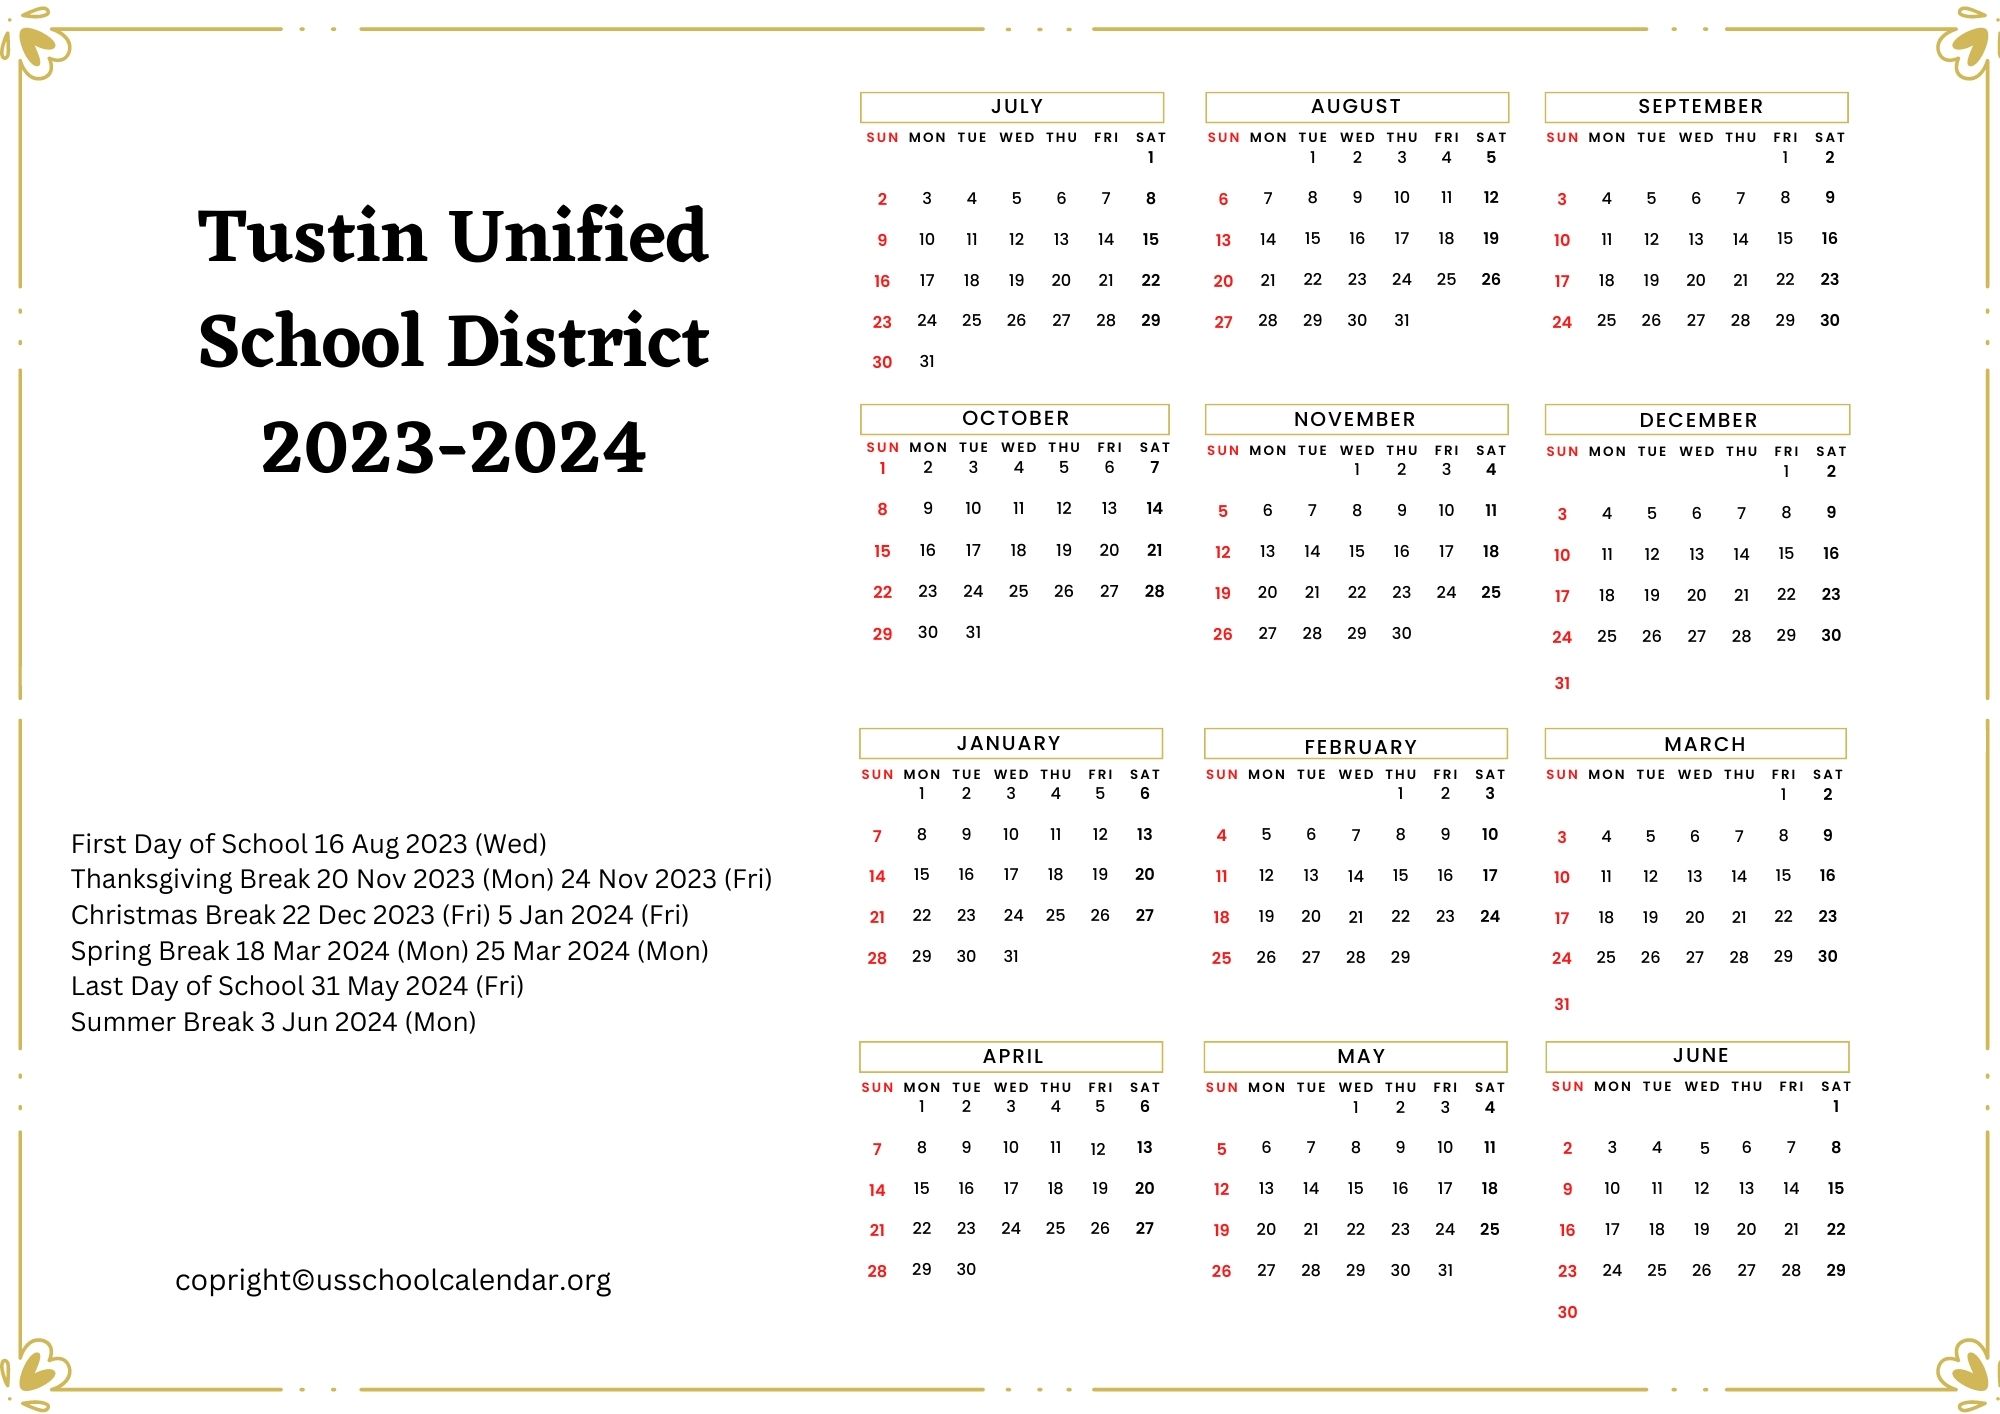 Tustin Unified School District Calendar with Holidays 20232024